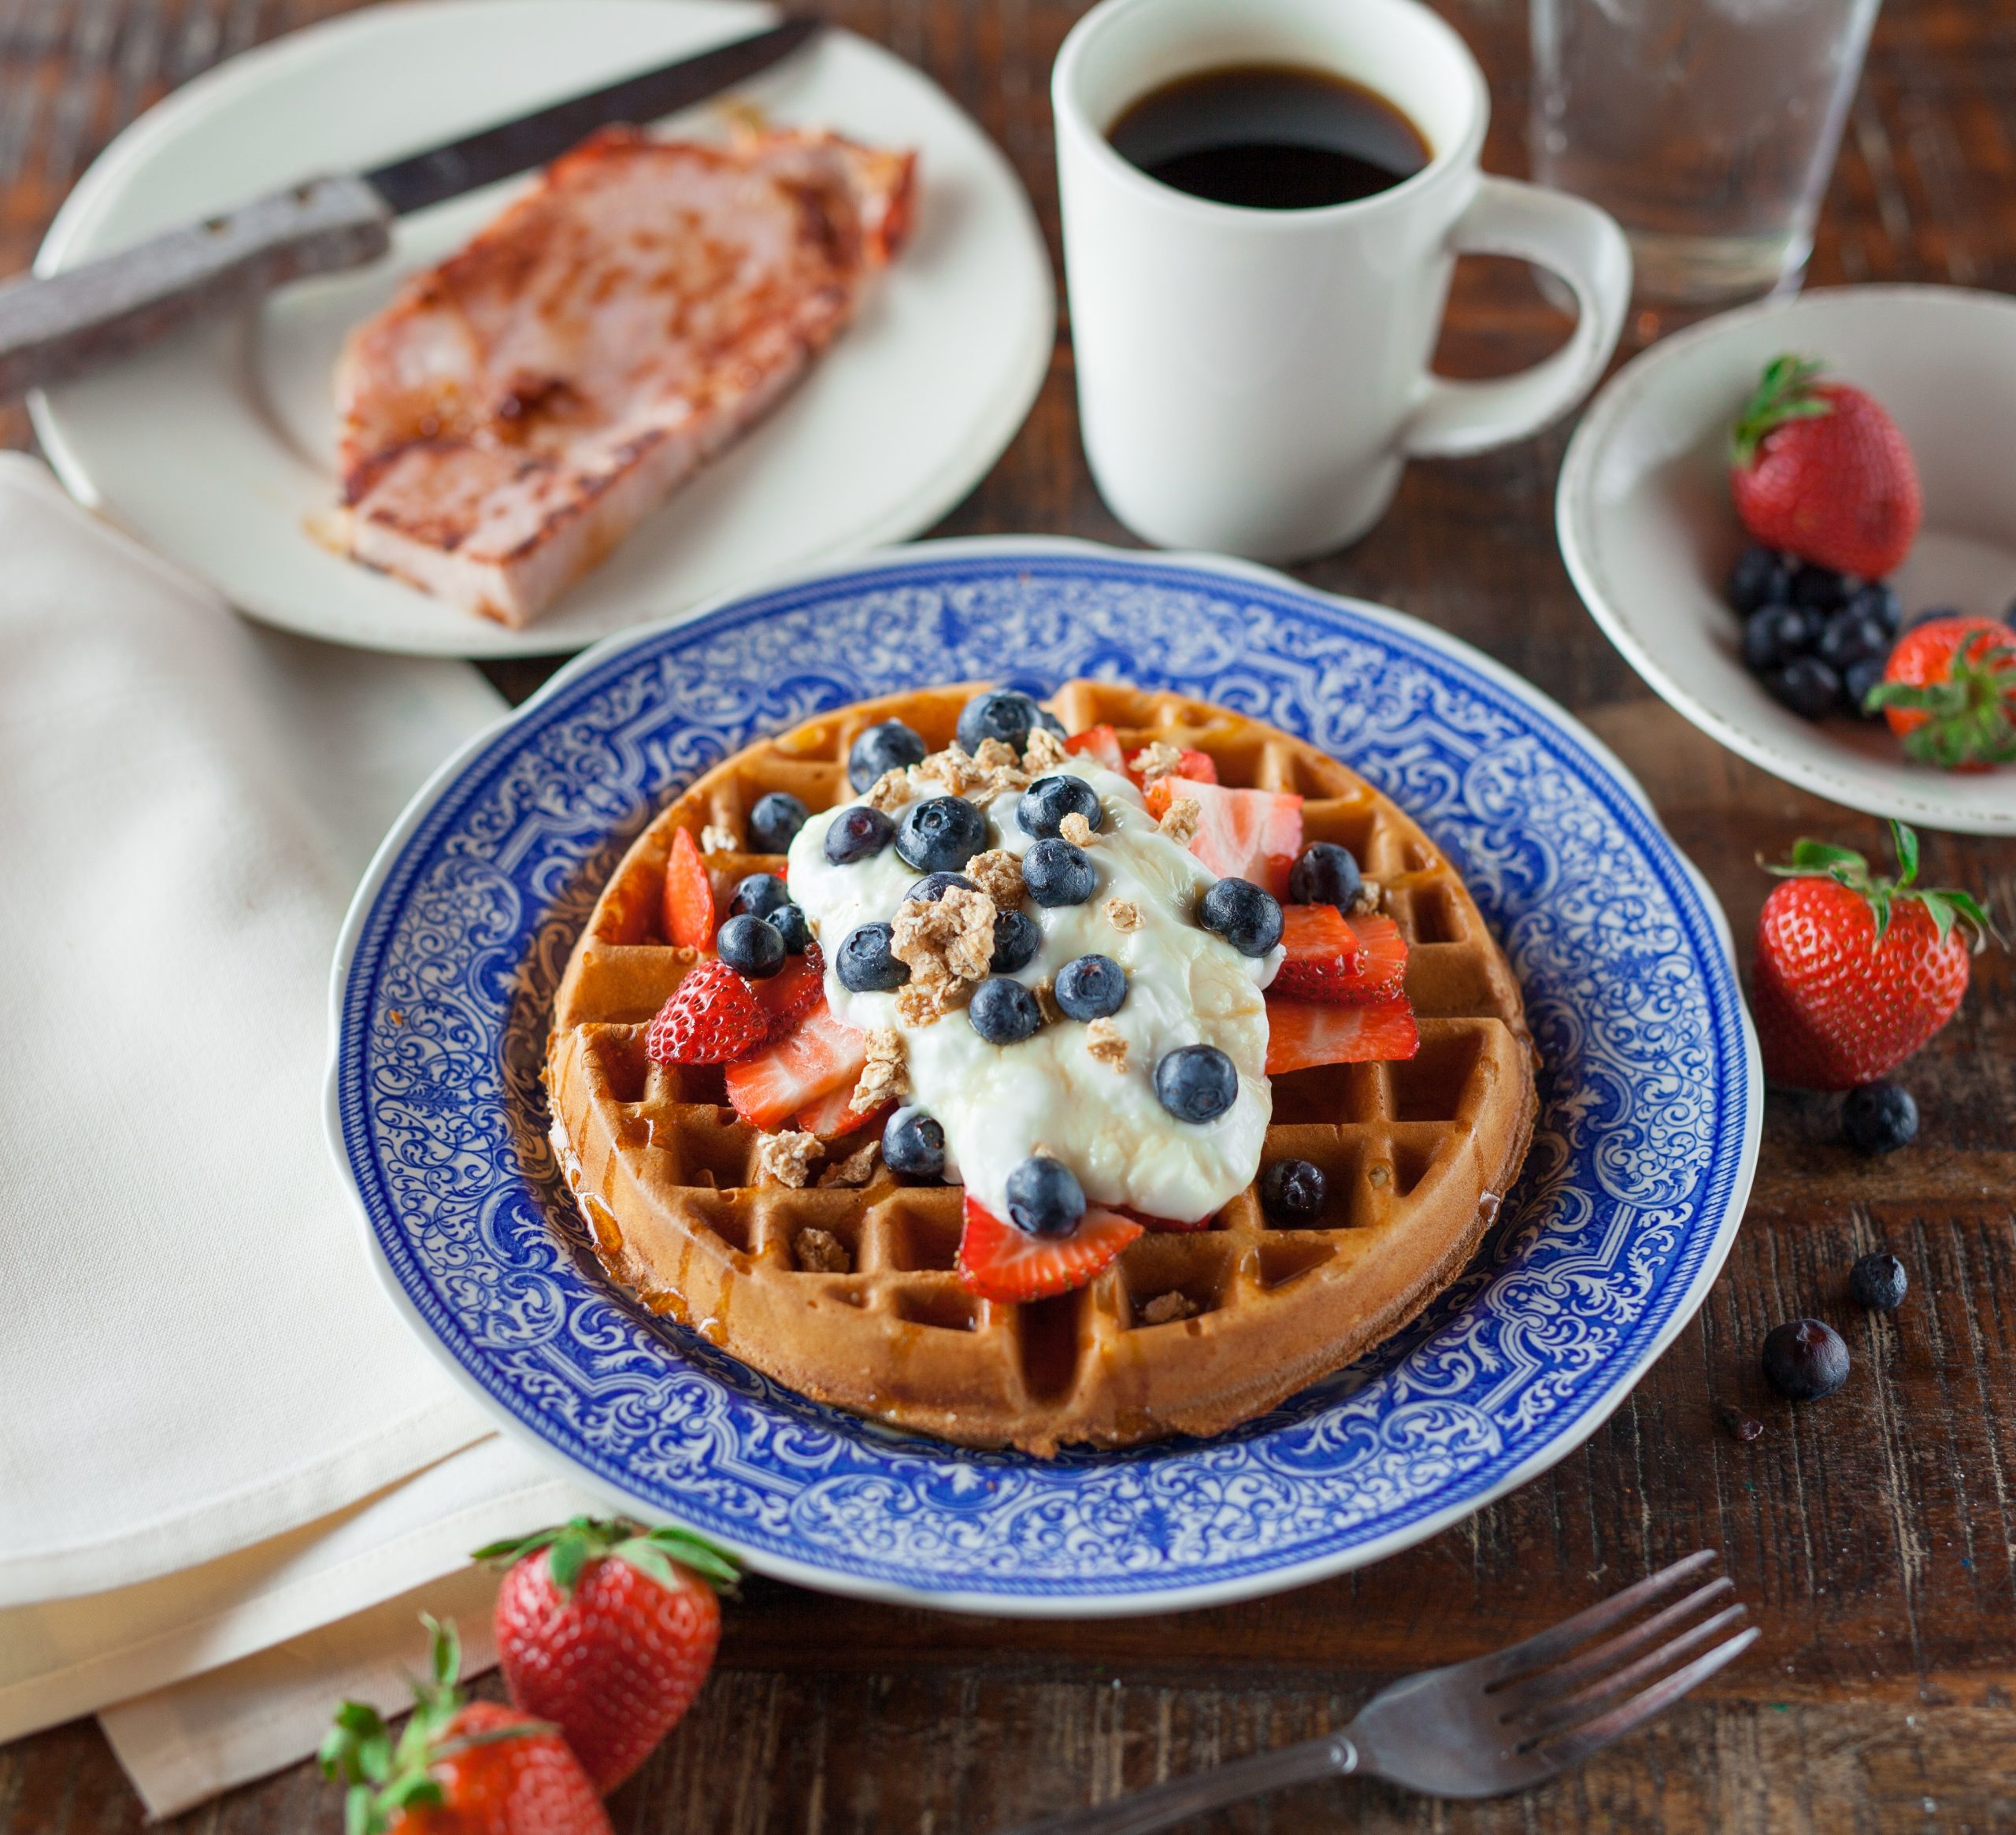 A plate of waffles surrounded by strawberries, ham, and coffee.